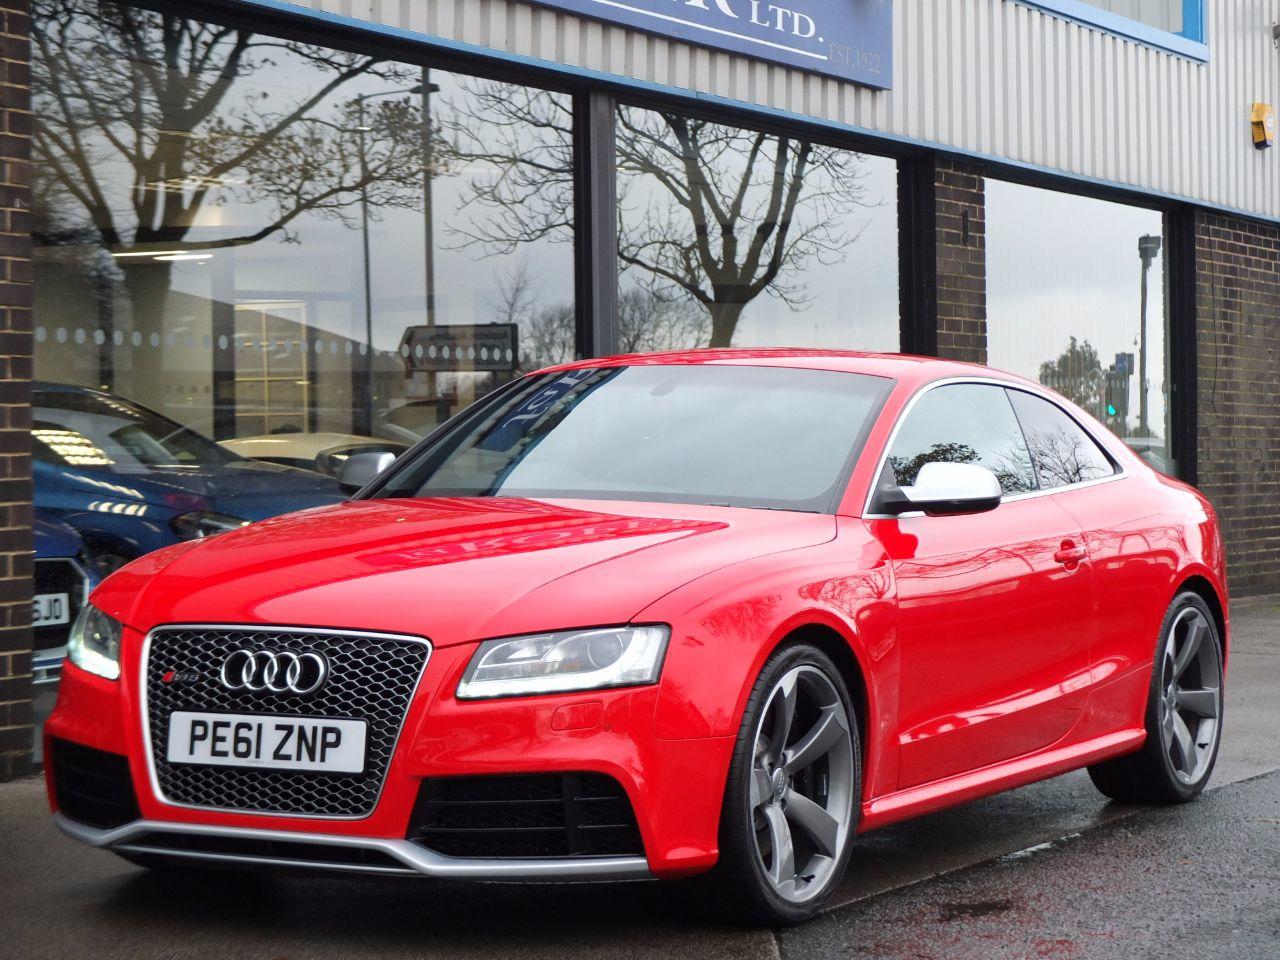 Audi RS5 4.2 FSI quattro (Bucket Seats, Miltek Exhaust, Tech Pack) Coupe Petrol Misano Red PearlAudi RS5 4.2 FSI quattro (Bucket Seats, Miltek Exhaust, Tech Pack) Coupe Petrol Misano Red Pearl at fa Roper Ltd Bradford